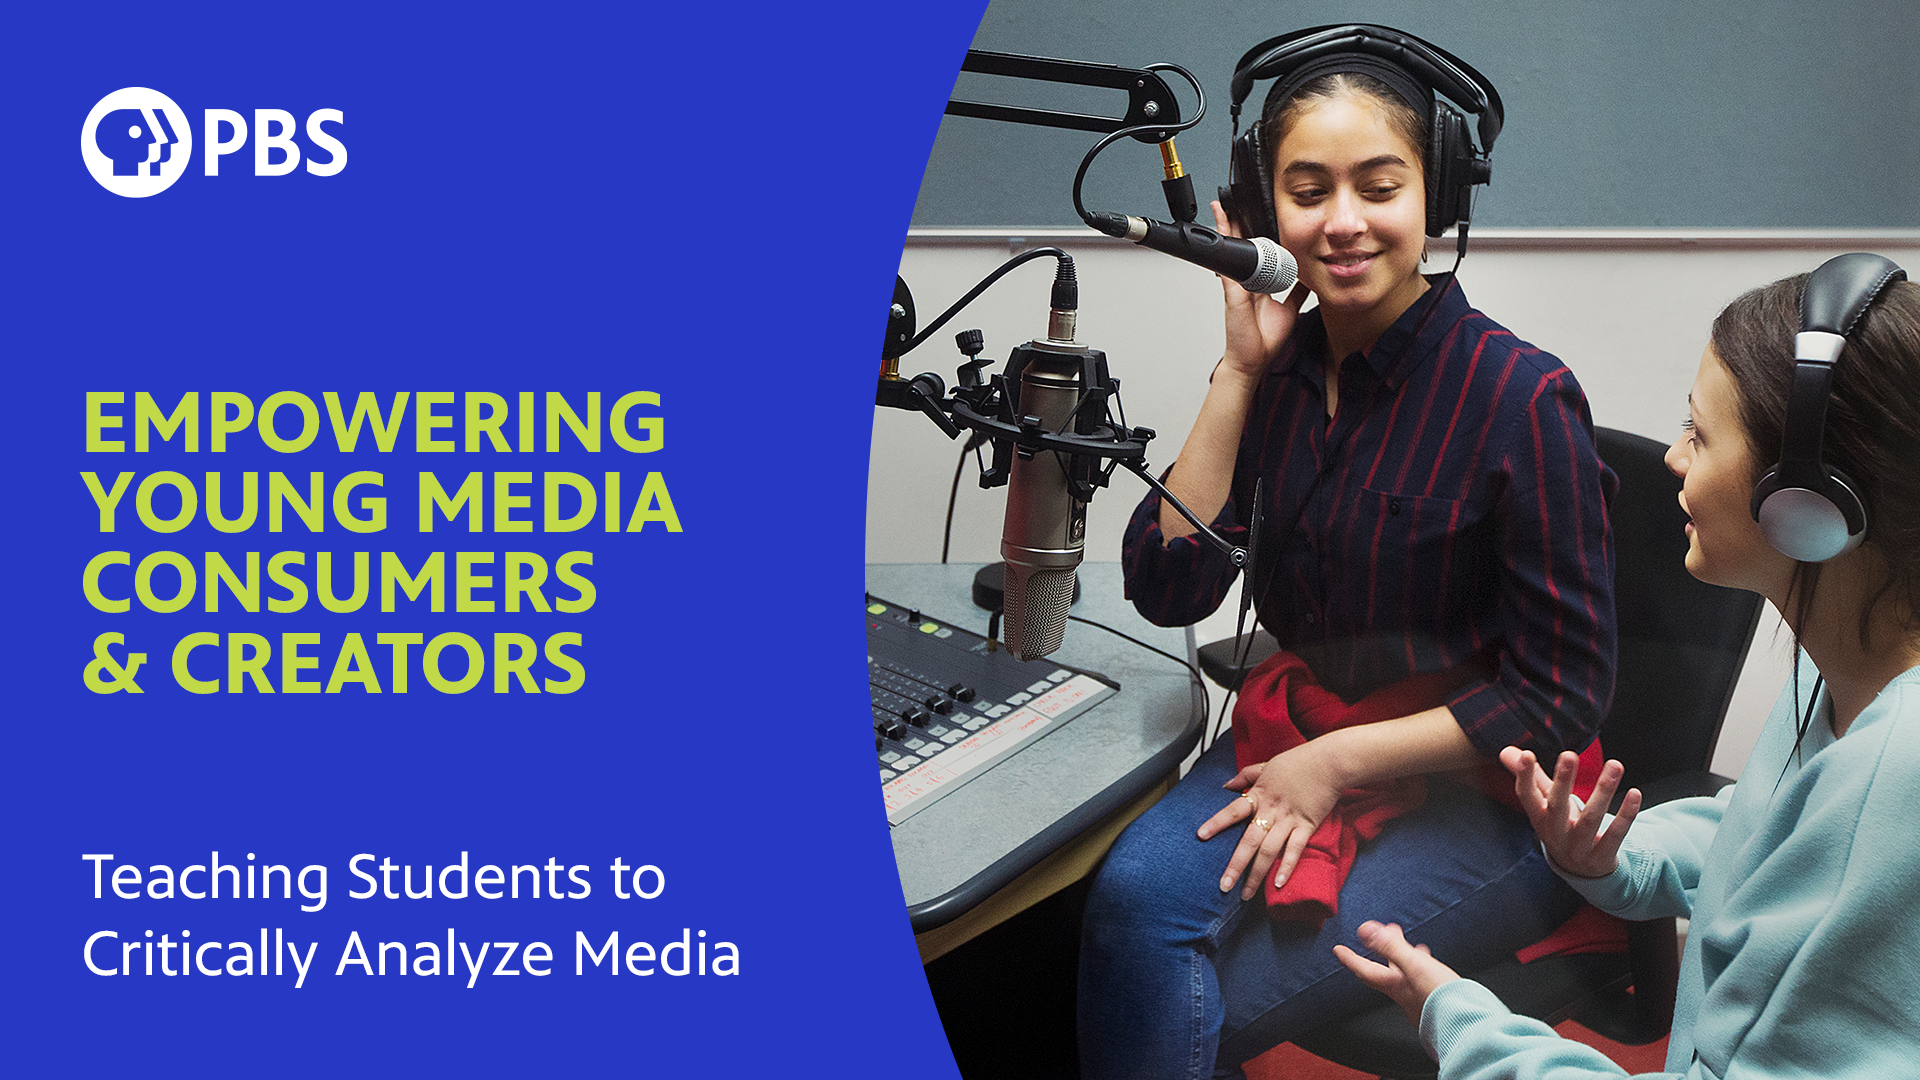 Teaching Students to Critically Analyze Media Empowering Young Media